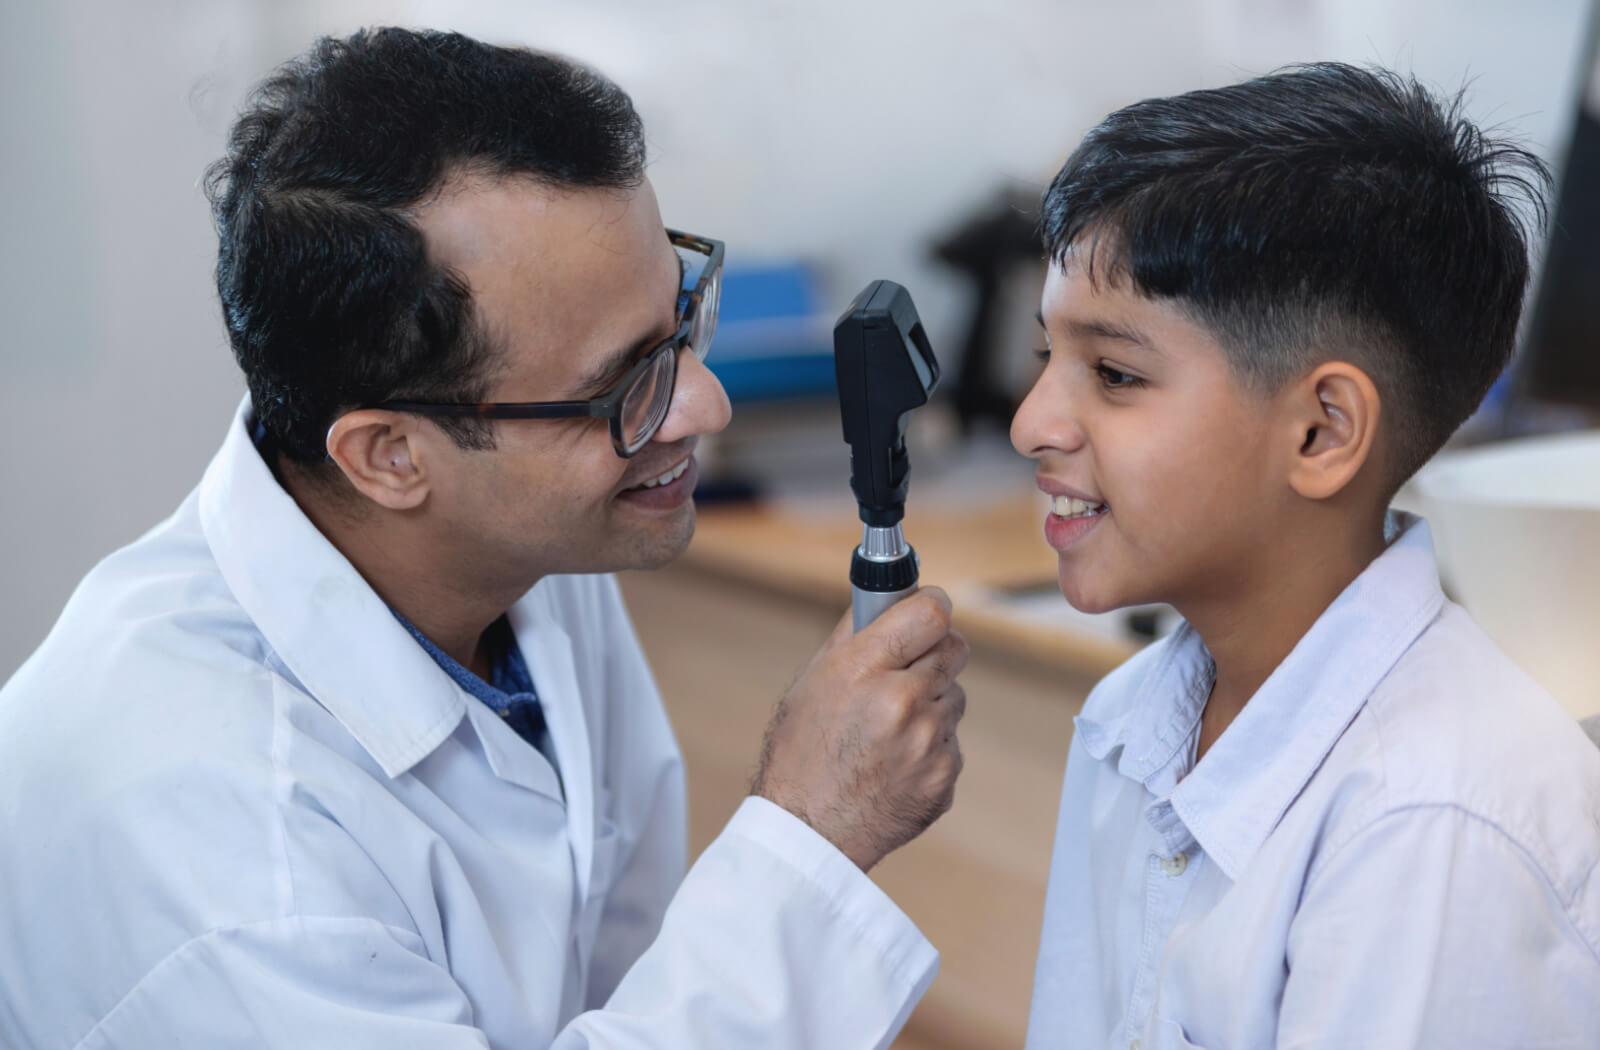 An optometrist conducts an eye exam on a young boy, both of them smiling